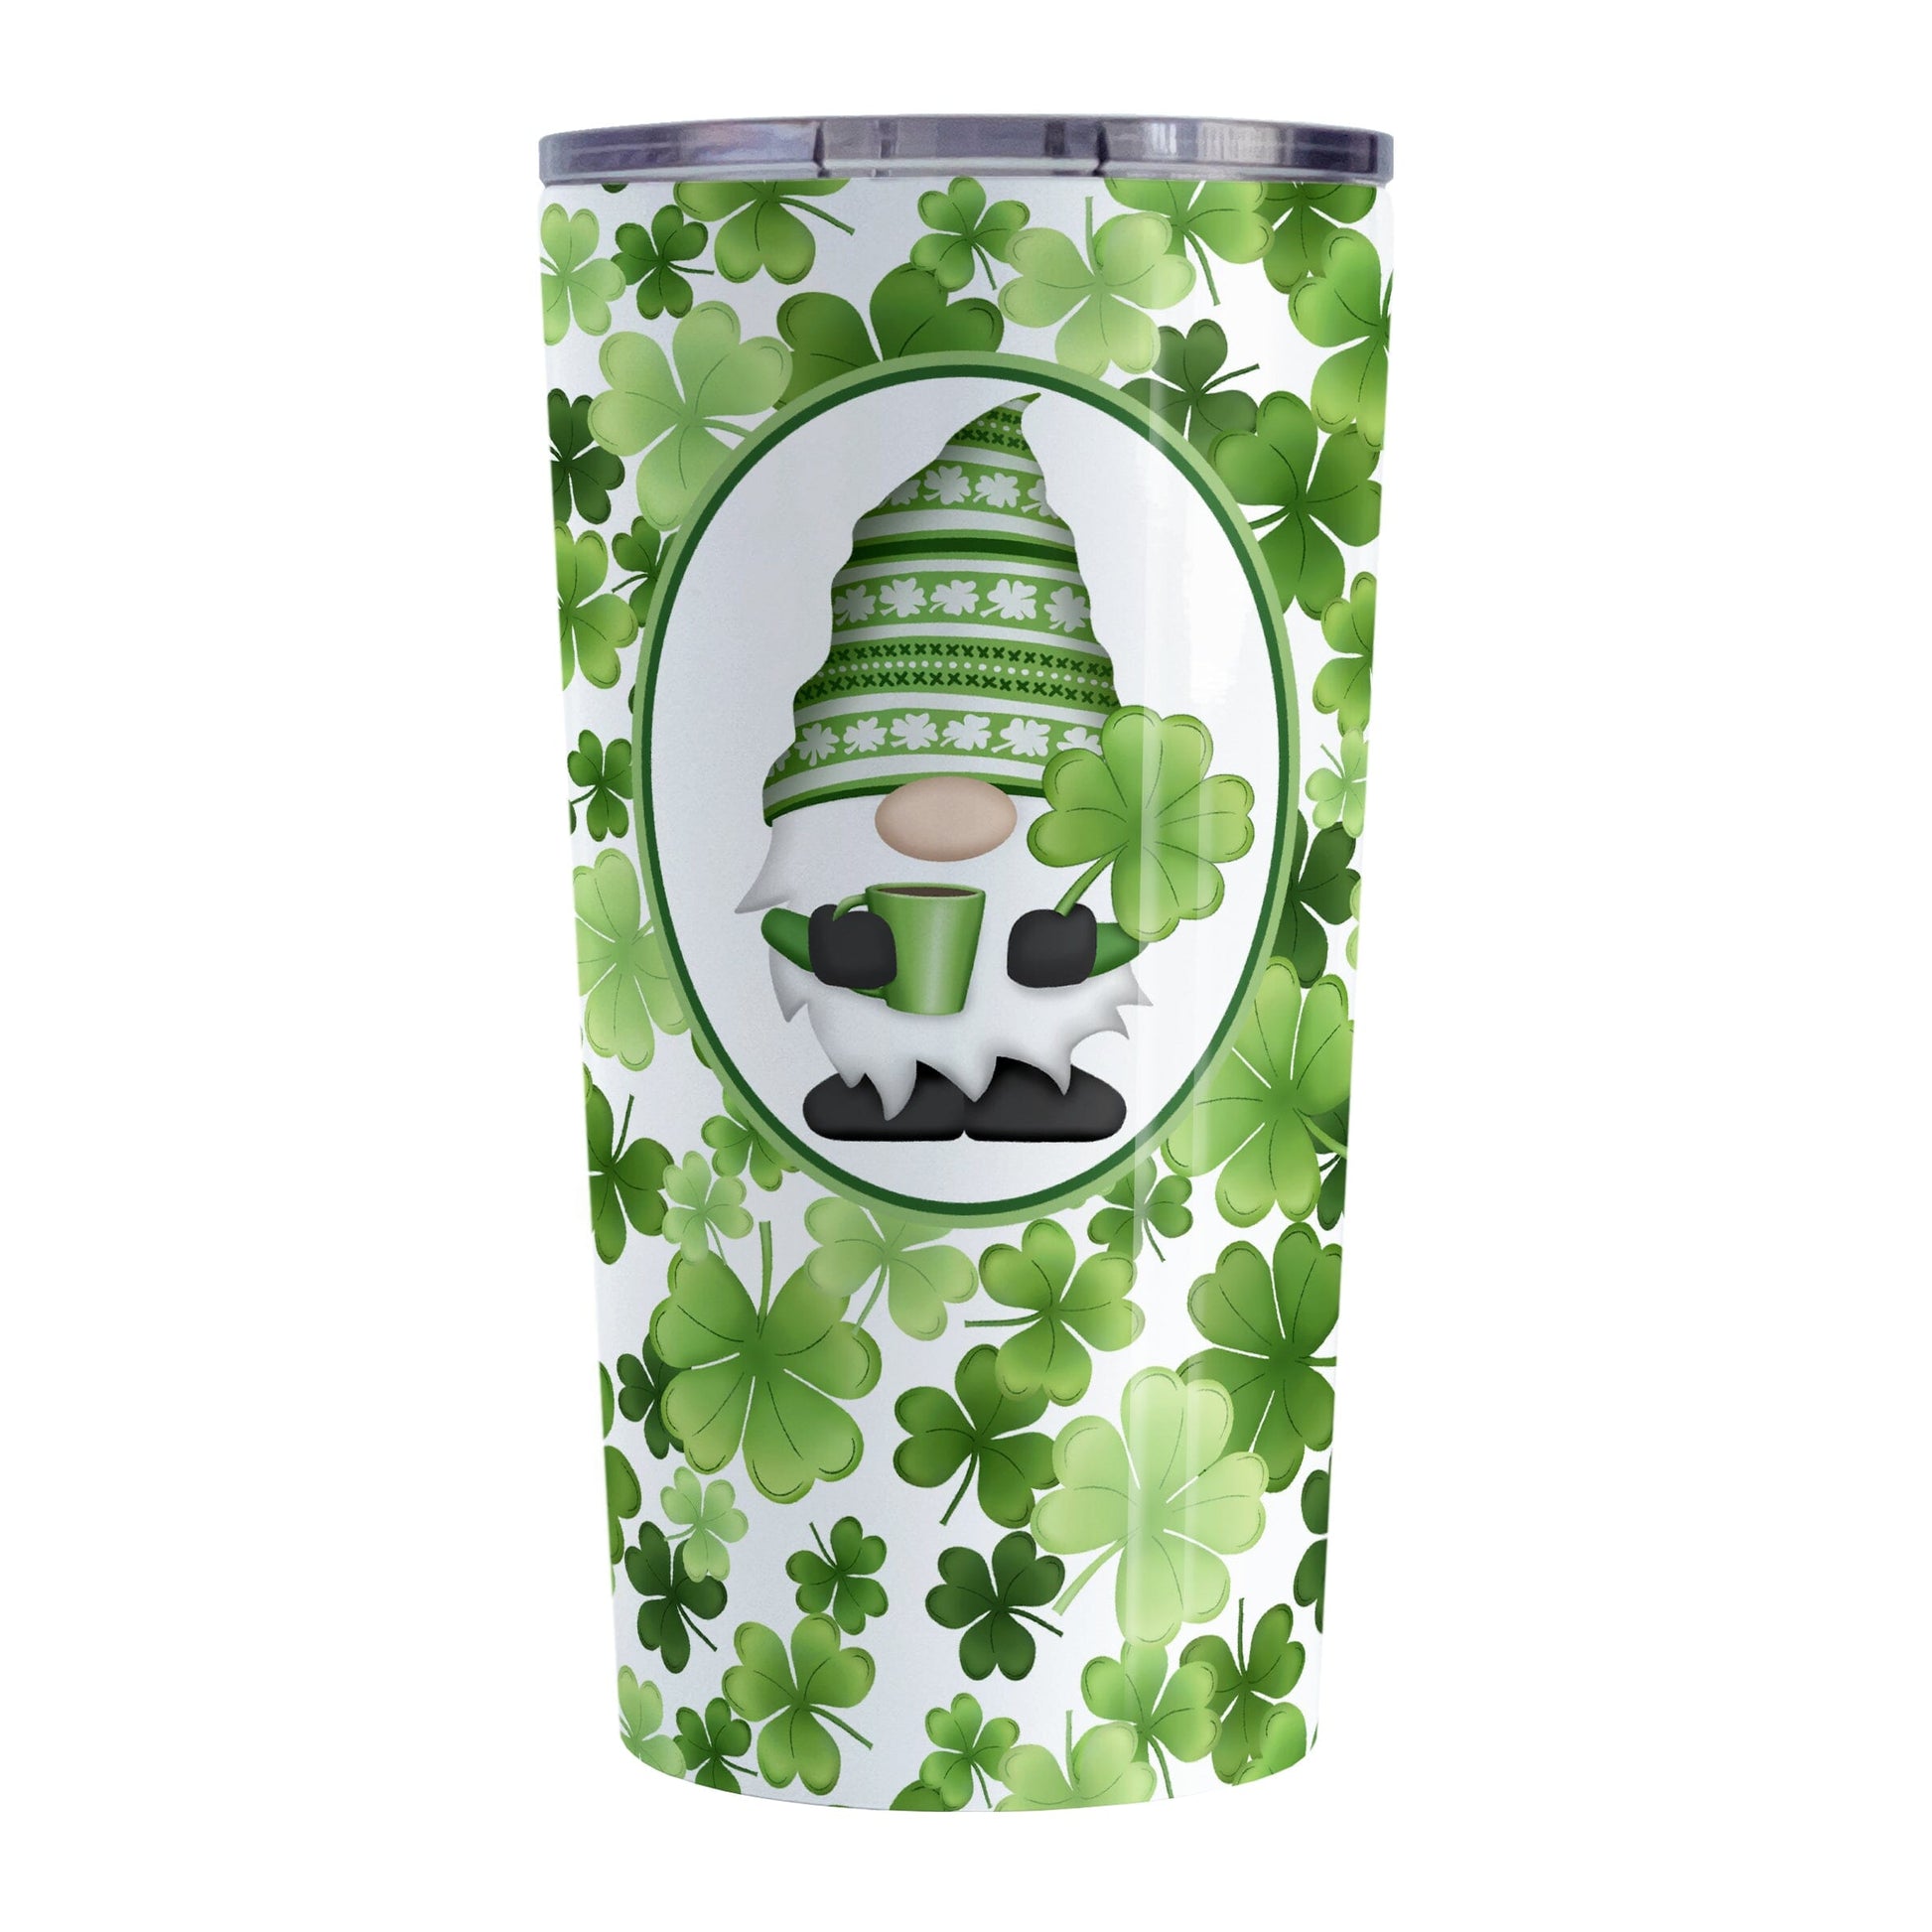 Green Gnome Shamrocks Tumbler Cup (20oz) at Amy's Coffee Mugs. A stainless steel tumbler cup designed with an adorable green hat gnome holding a 4-leaf clover and a hot beverage in a white oval over a pattern of green shamrocks in different shades of green that wrap around the cup.